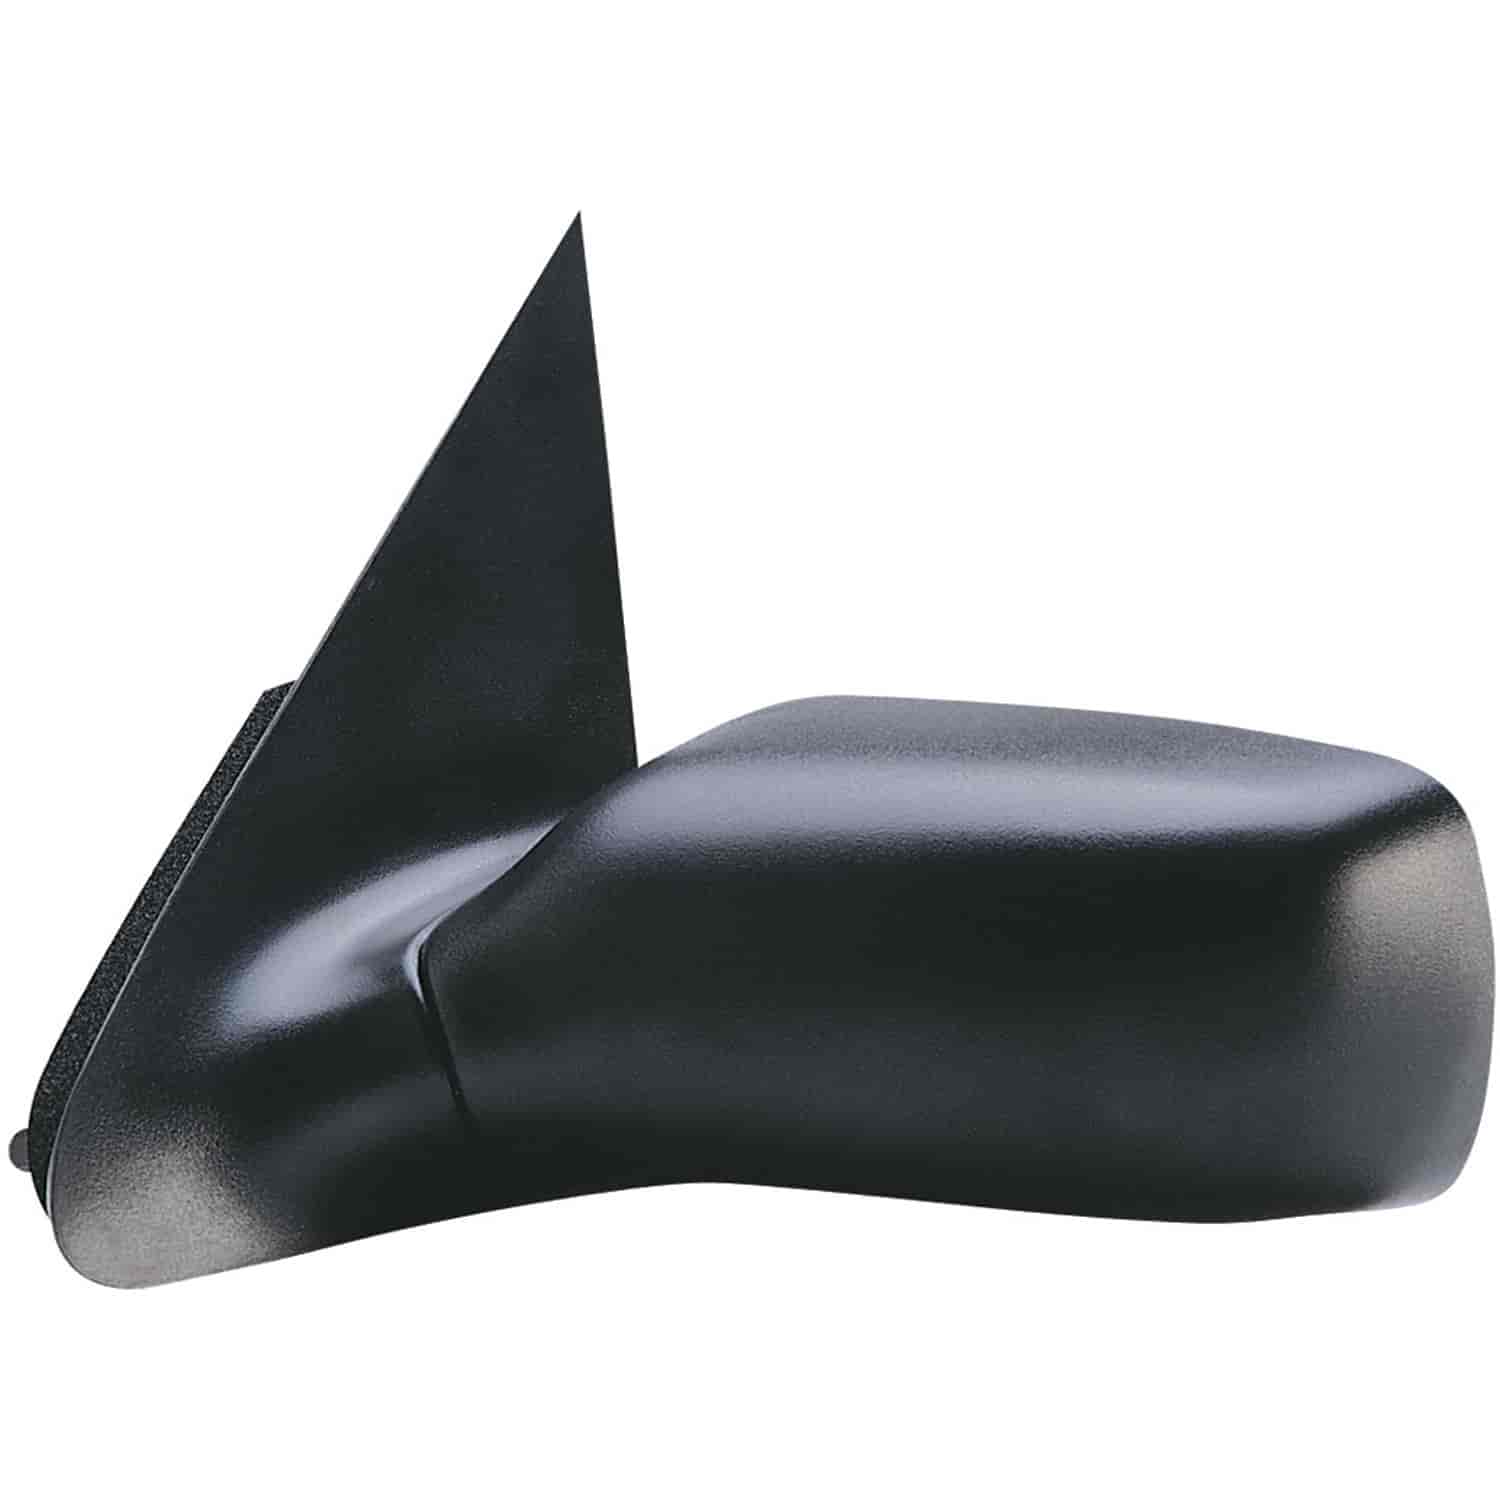 OEM Style Replacement mirror for 95-96 Ford Contour Mercury Mystique driver side mirror tested to fi